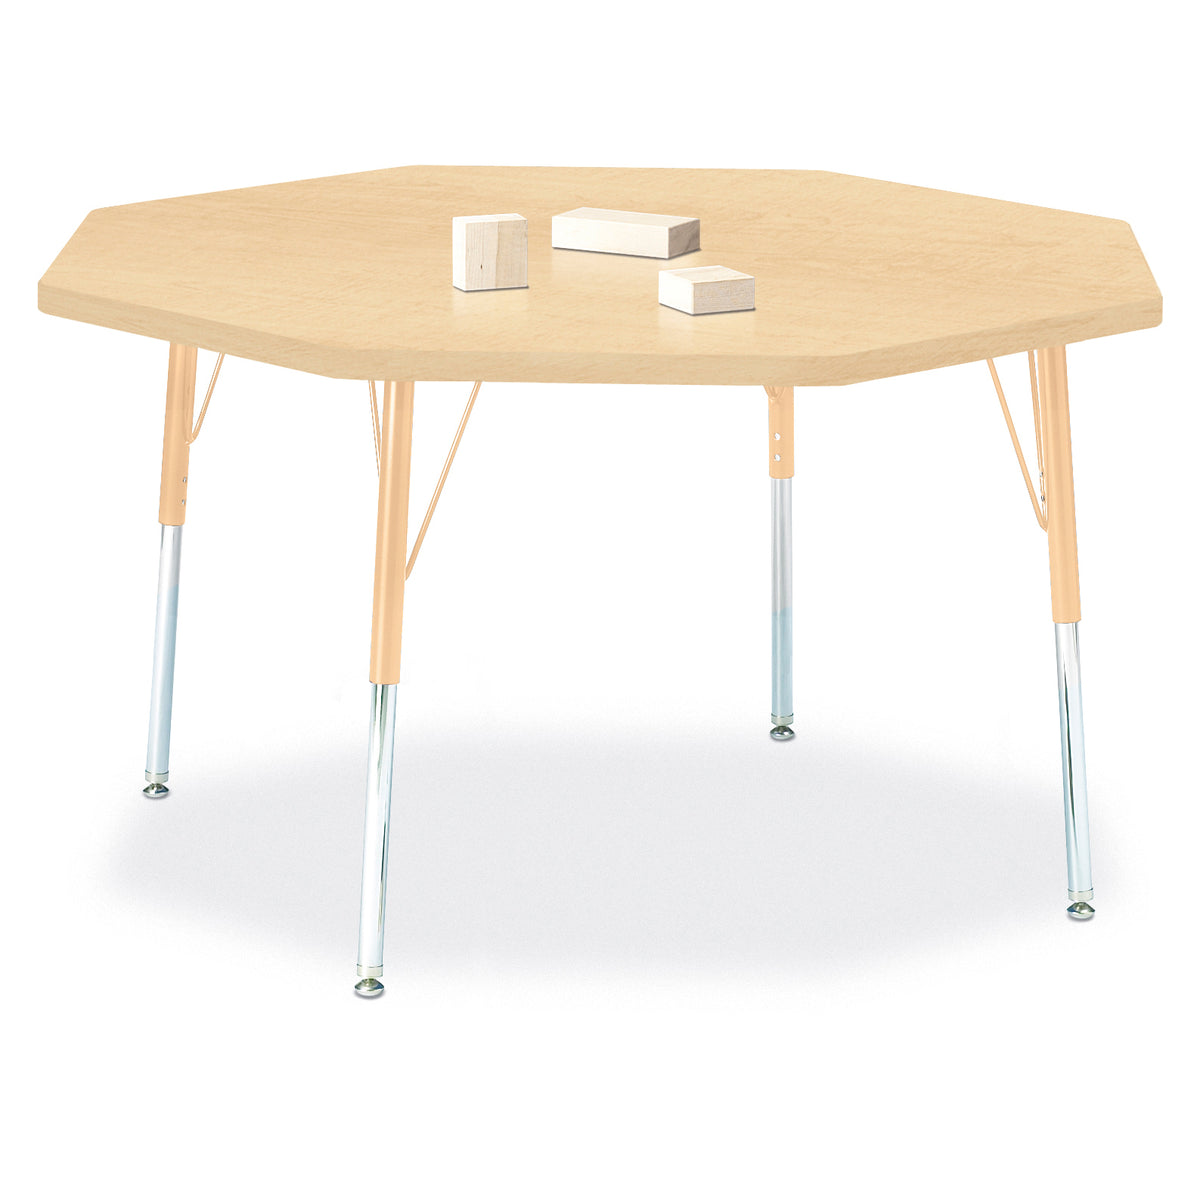 6428JCA251, Berries Octagon Activity Table - 48" X 48", A-height - Maple/Maple/Camel